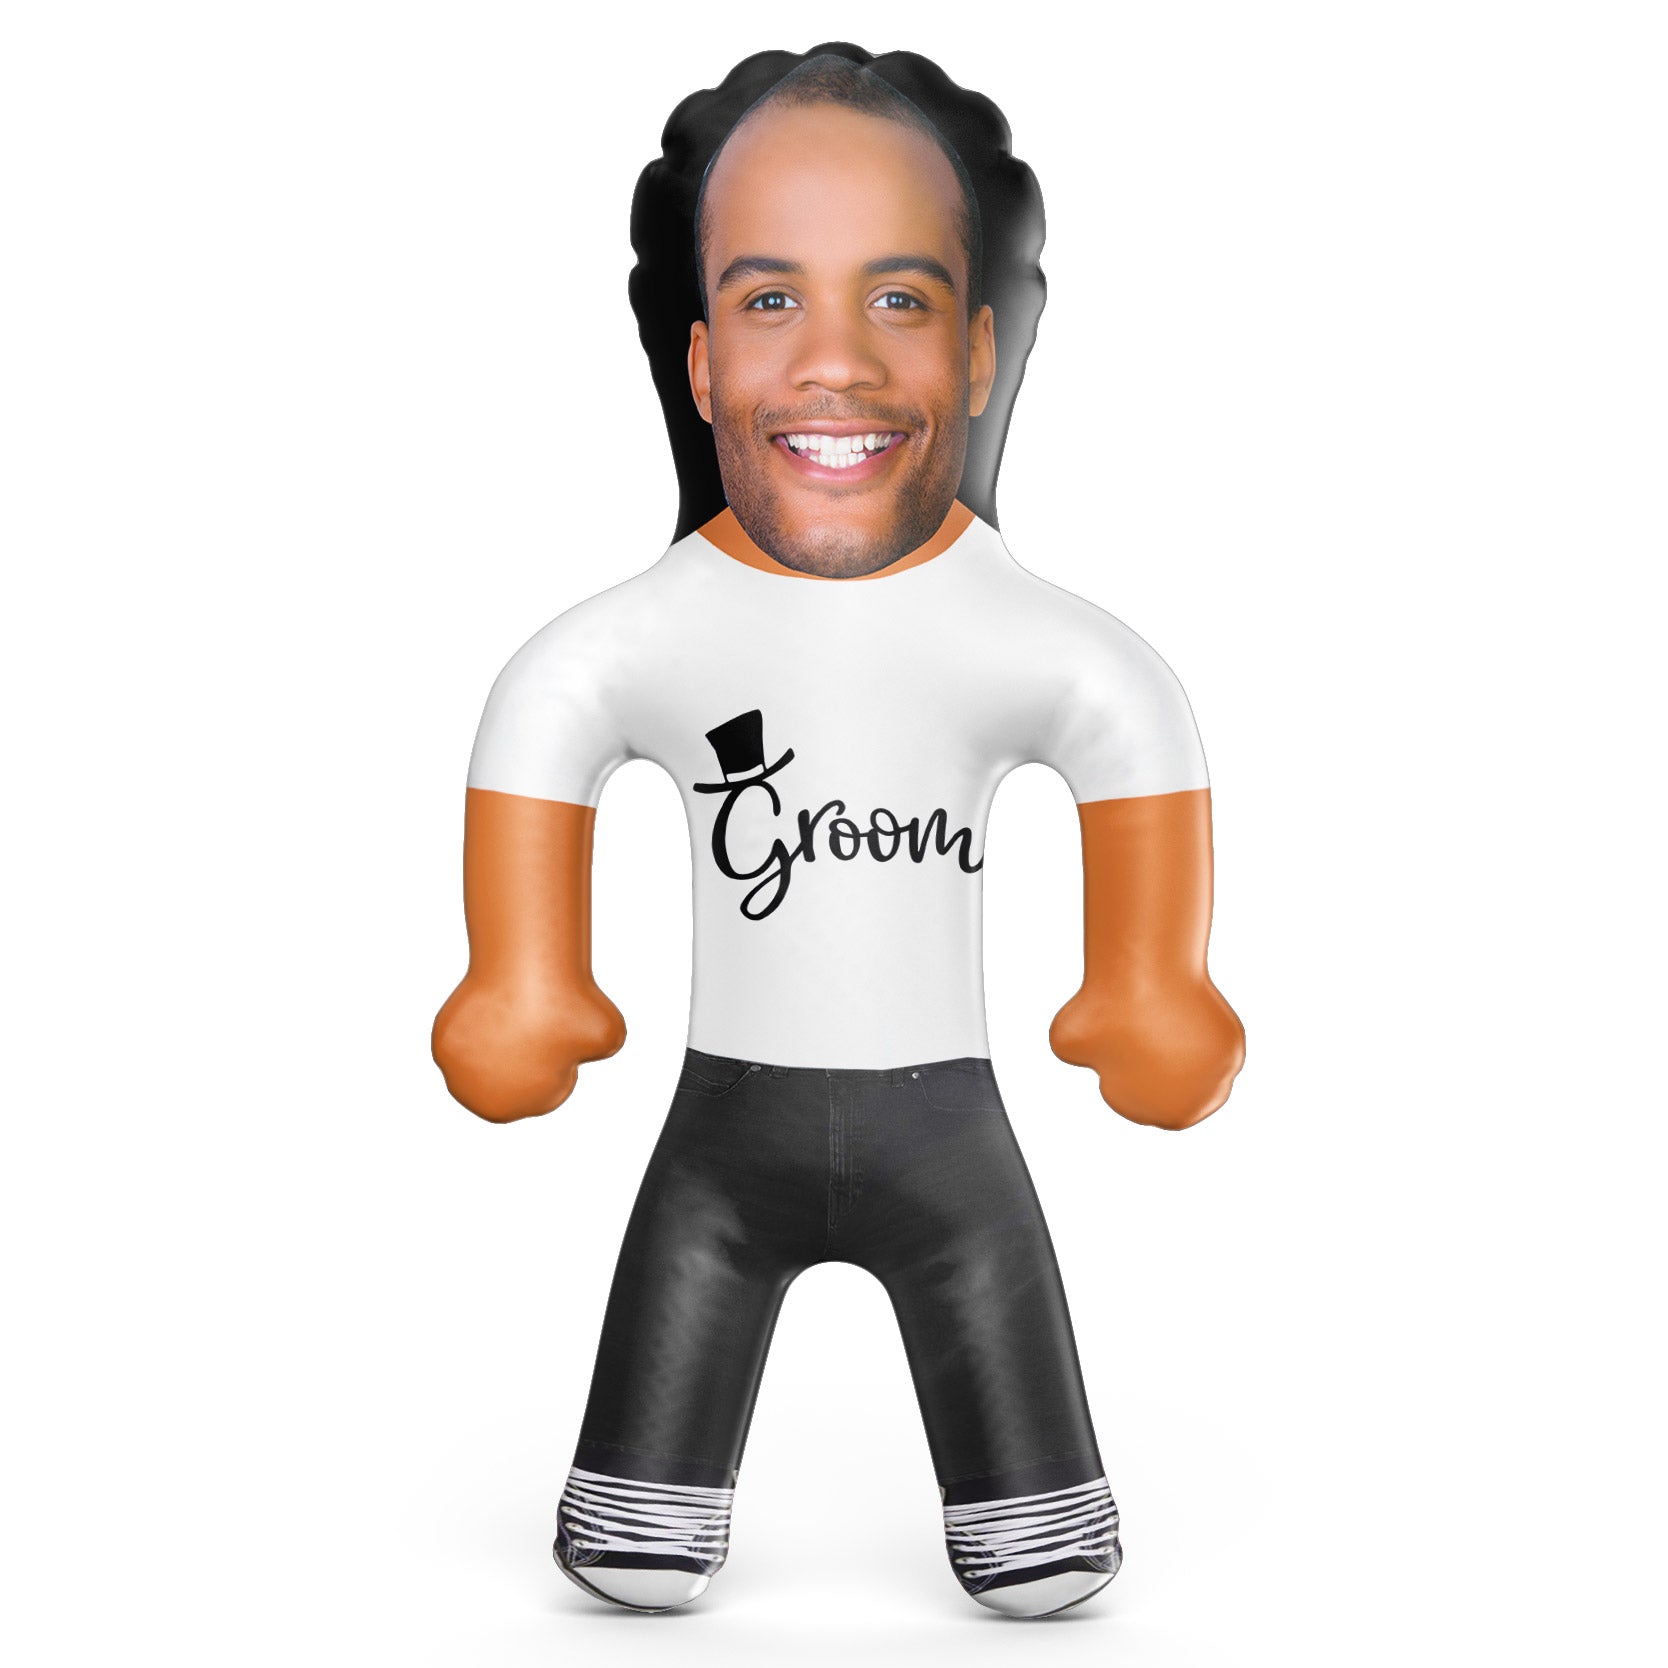 Groom T Shirt Inflatable Doll - Groom Blow Up Doll